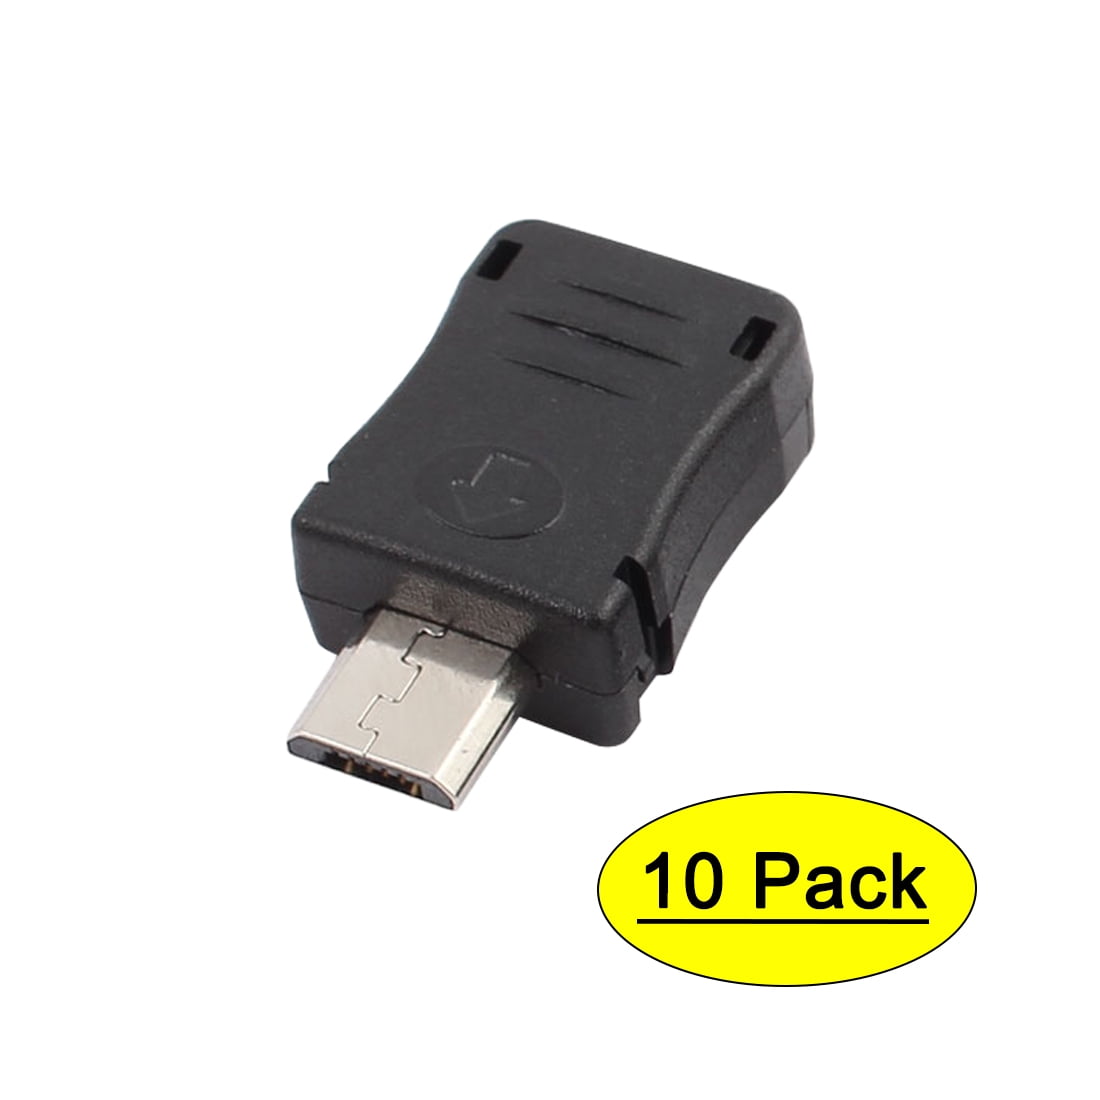 10PCS Micro USB Type B Male Plug Connector Kit with Plastic Cover for DIYS! 